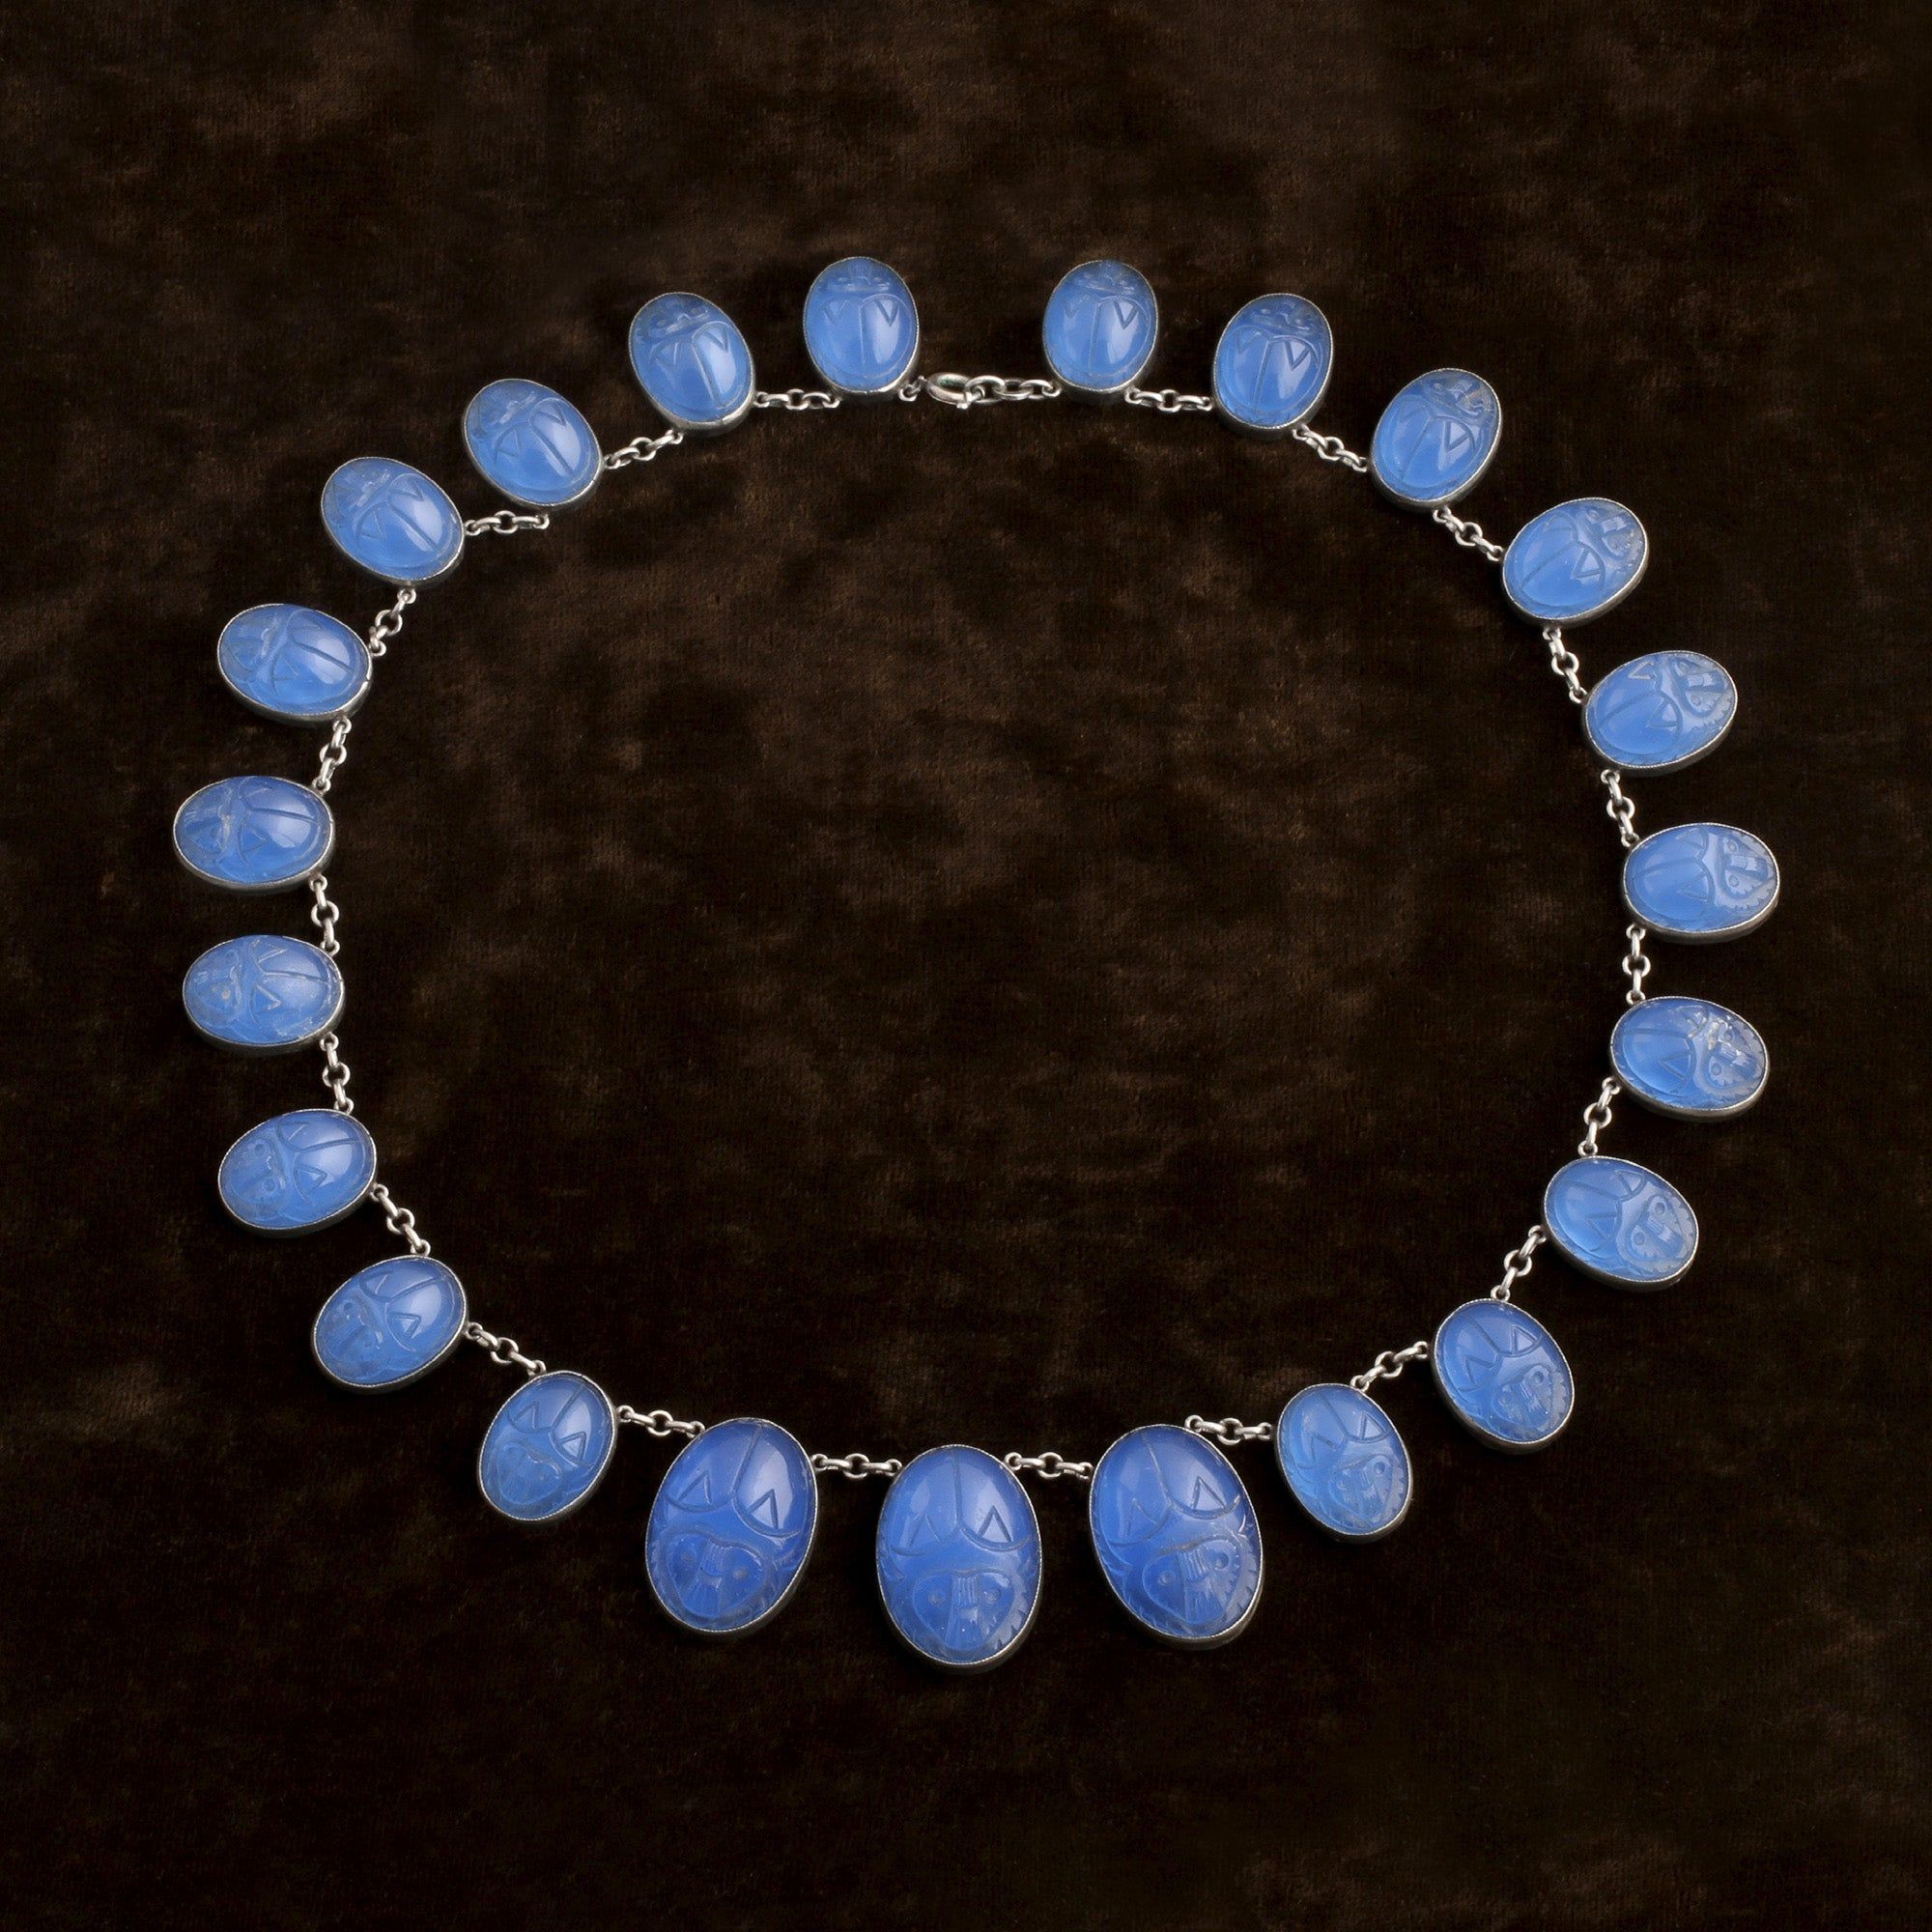 Detail of Egyptian Revival Blue Glass Scarab Necklace